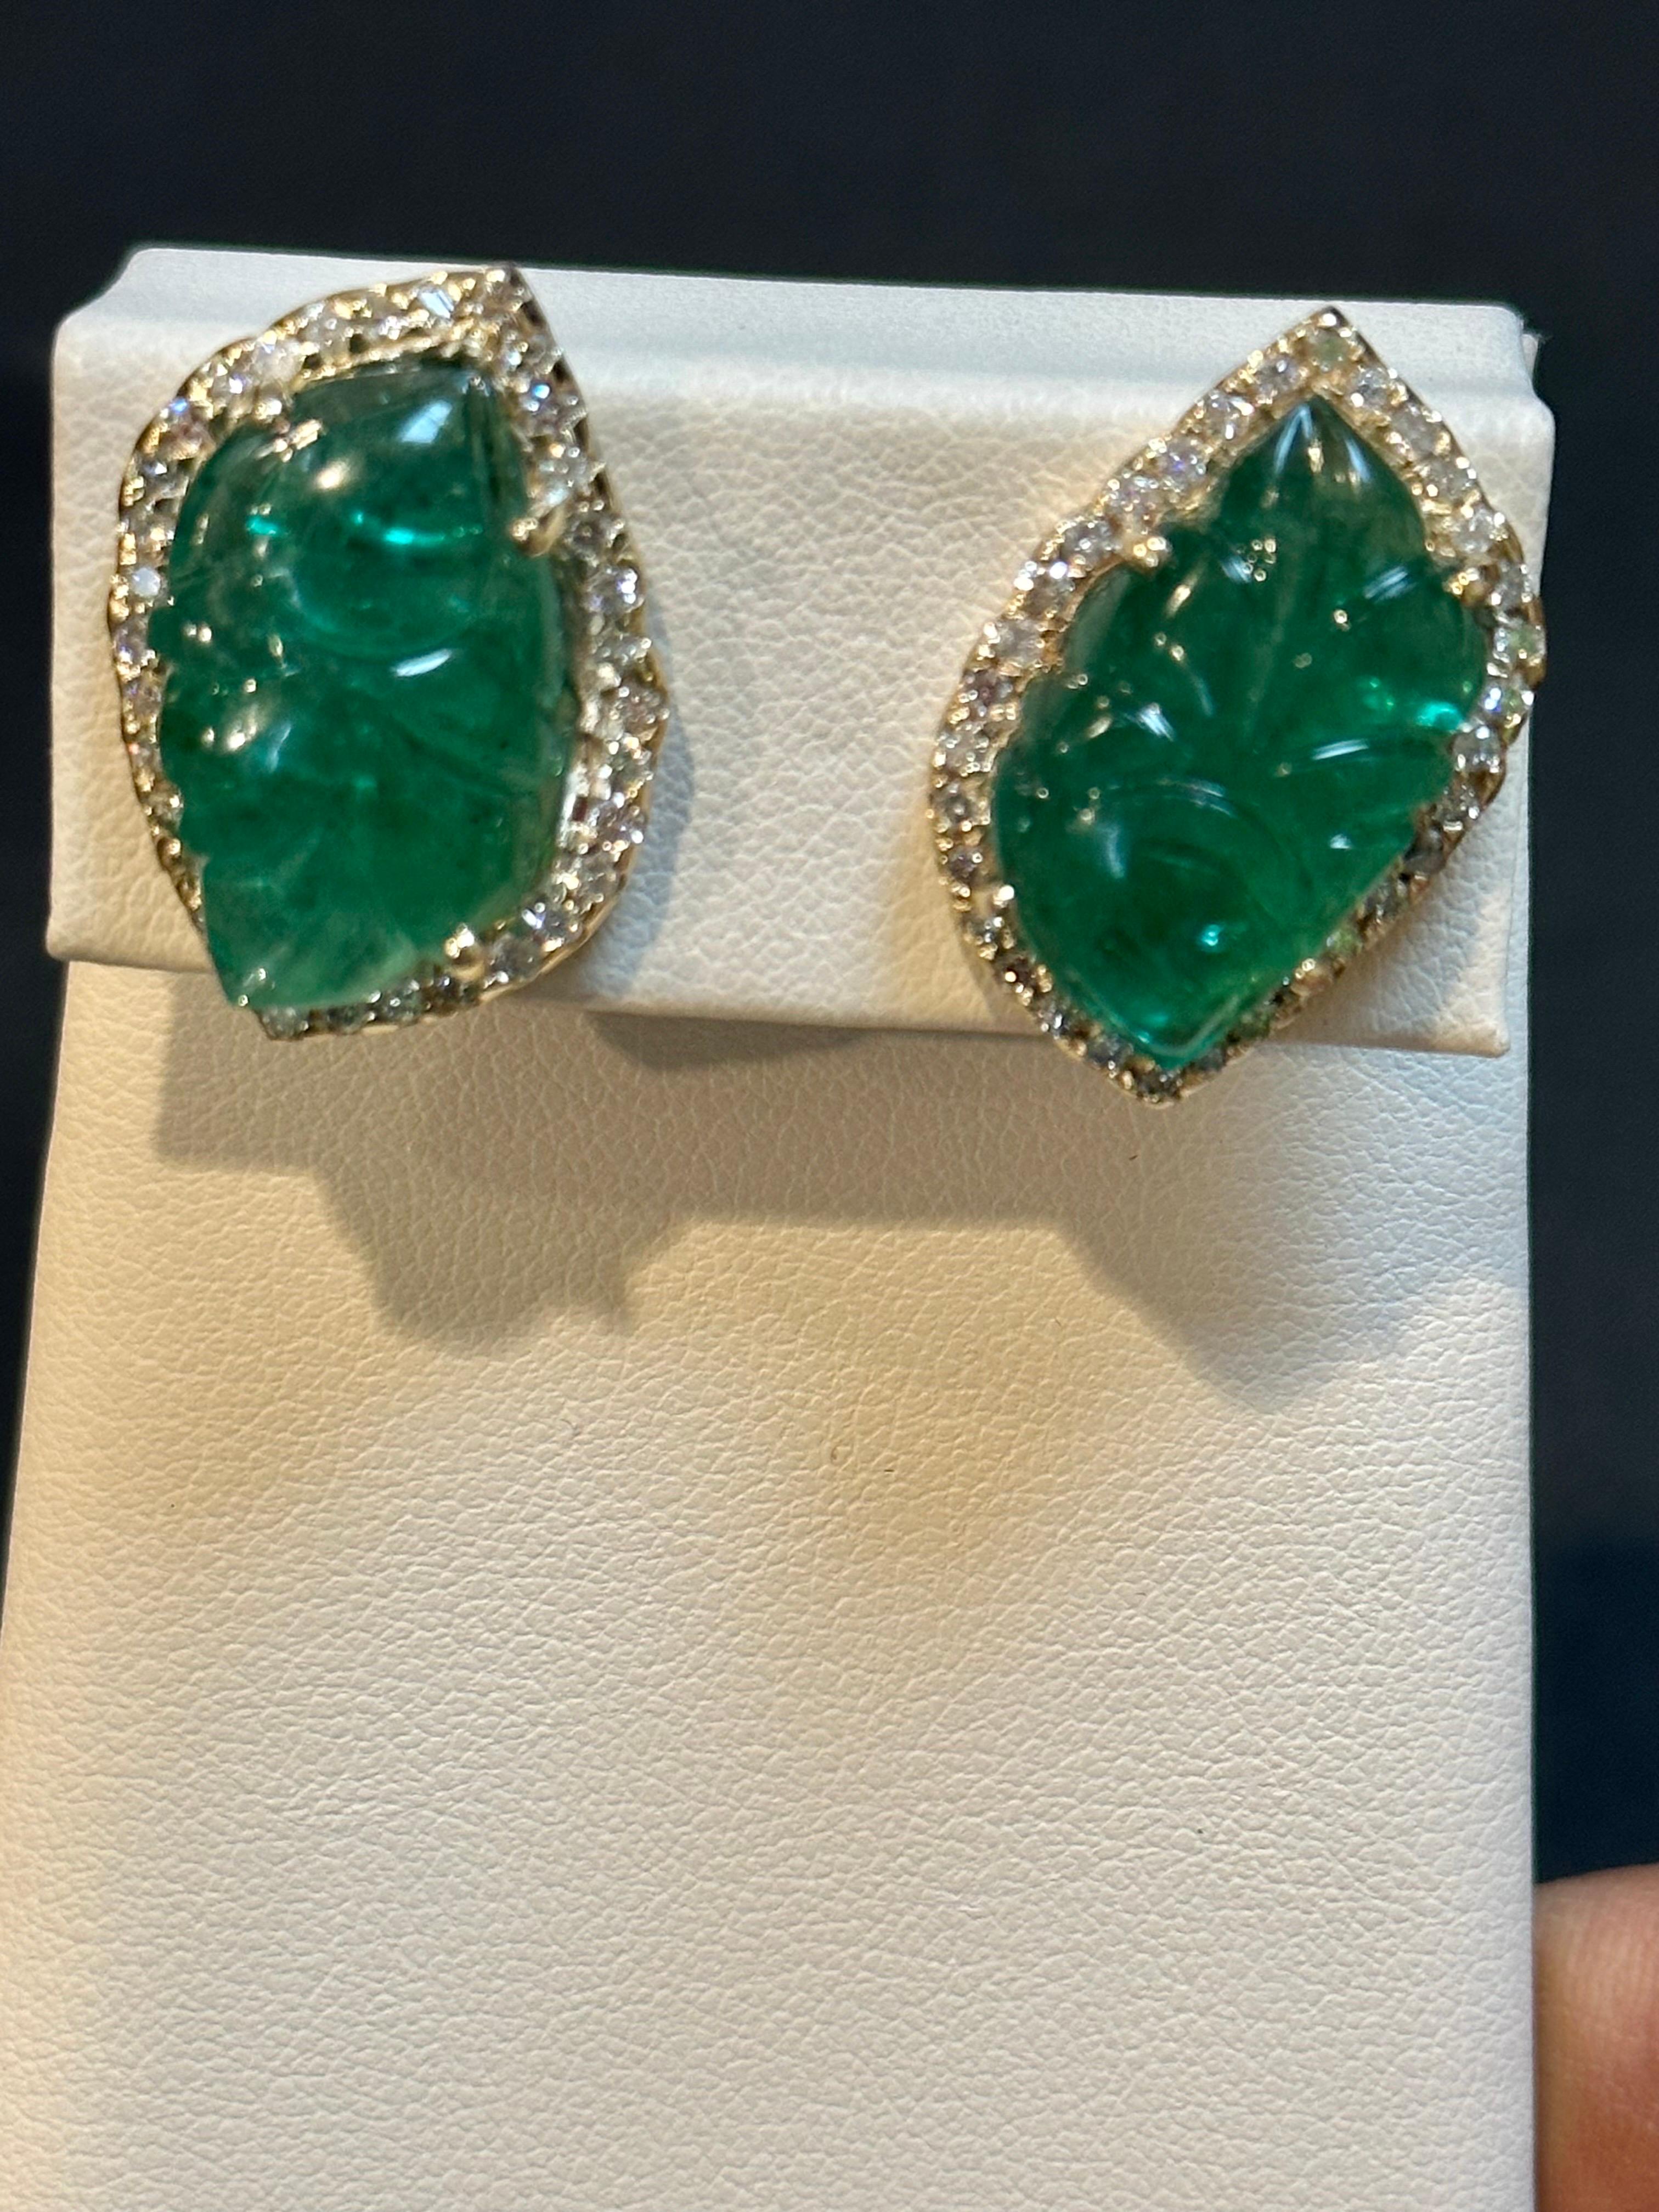 22 Ct Carved Emerald & 2 Ct Diamond Earrings 14 Karat Yellow Gold Post Earrings For Sale 1